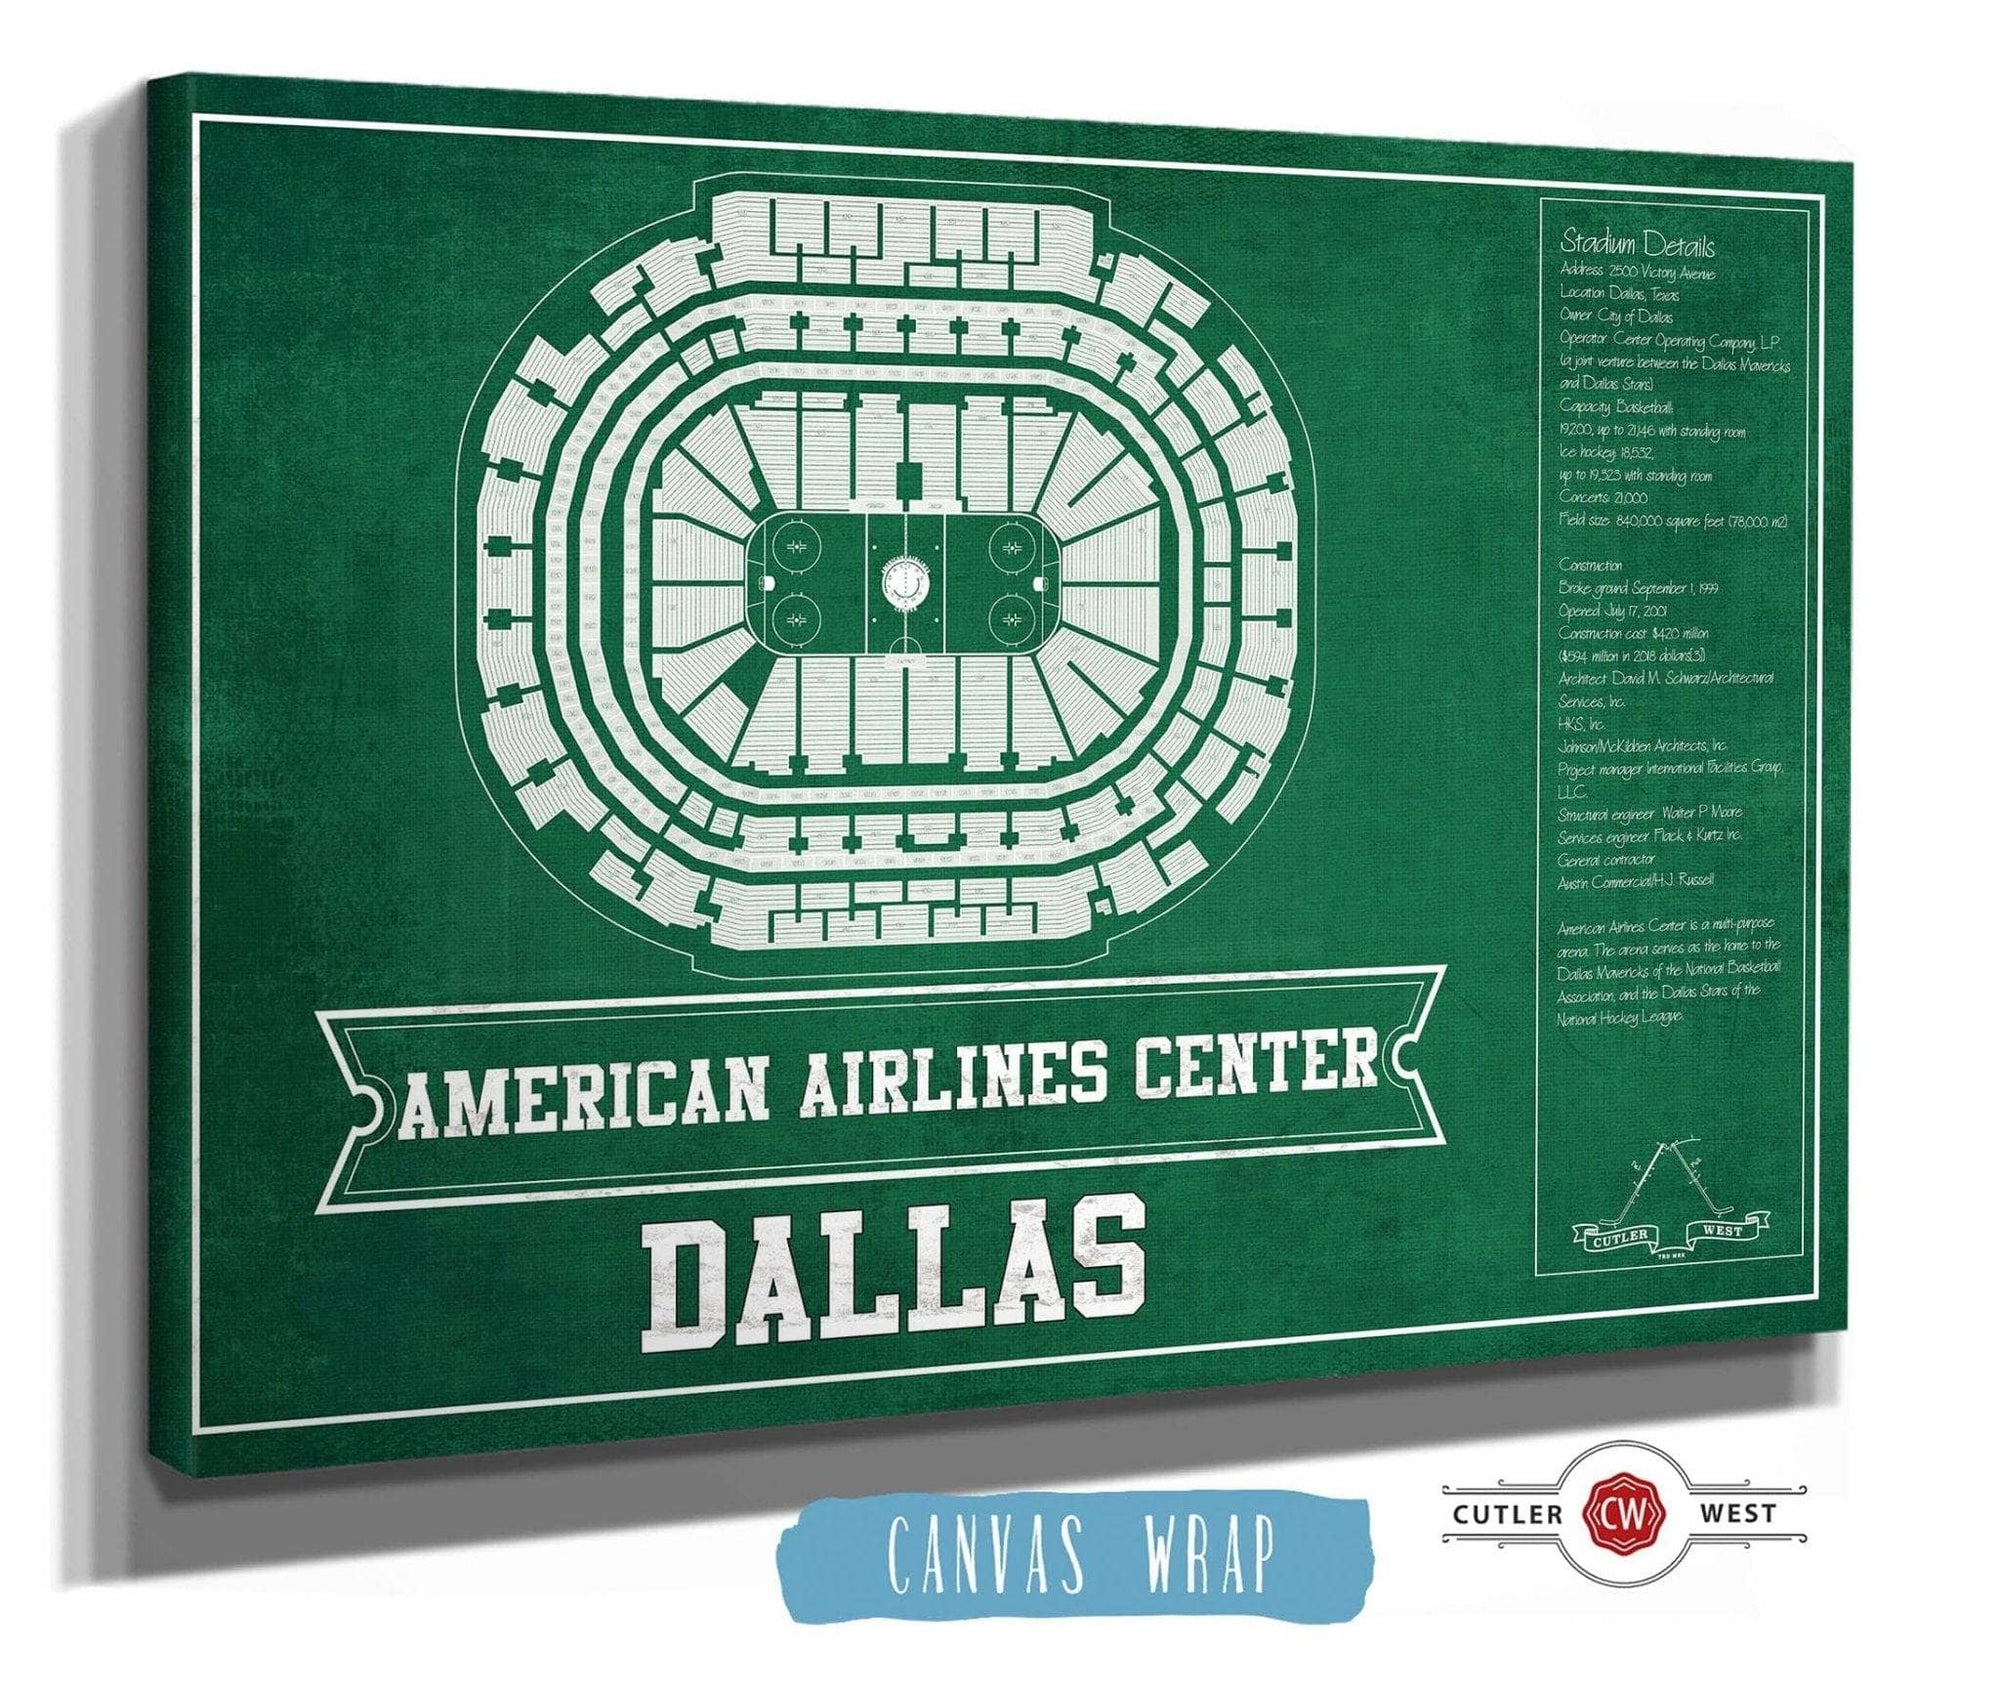 Cutler West 14" x 11" / Stretched Canvas Wrap Dallas Stars Team Colors - American Airlines Center Vintage Hockey Blueprint NHL Print 933350192-14"-x-11"79406